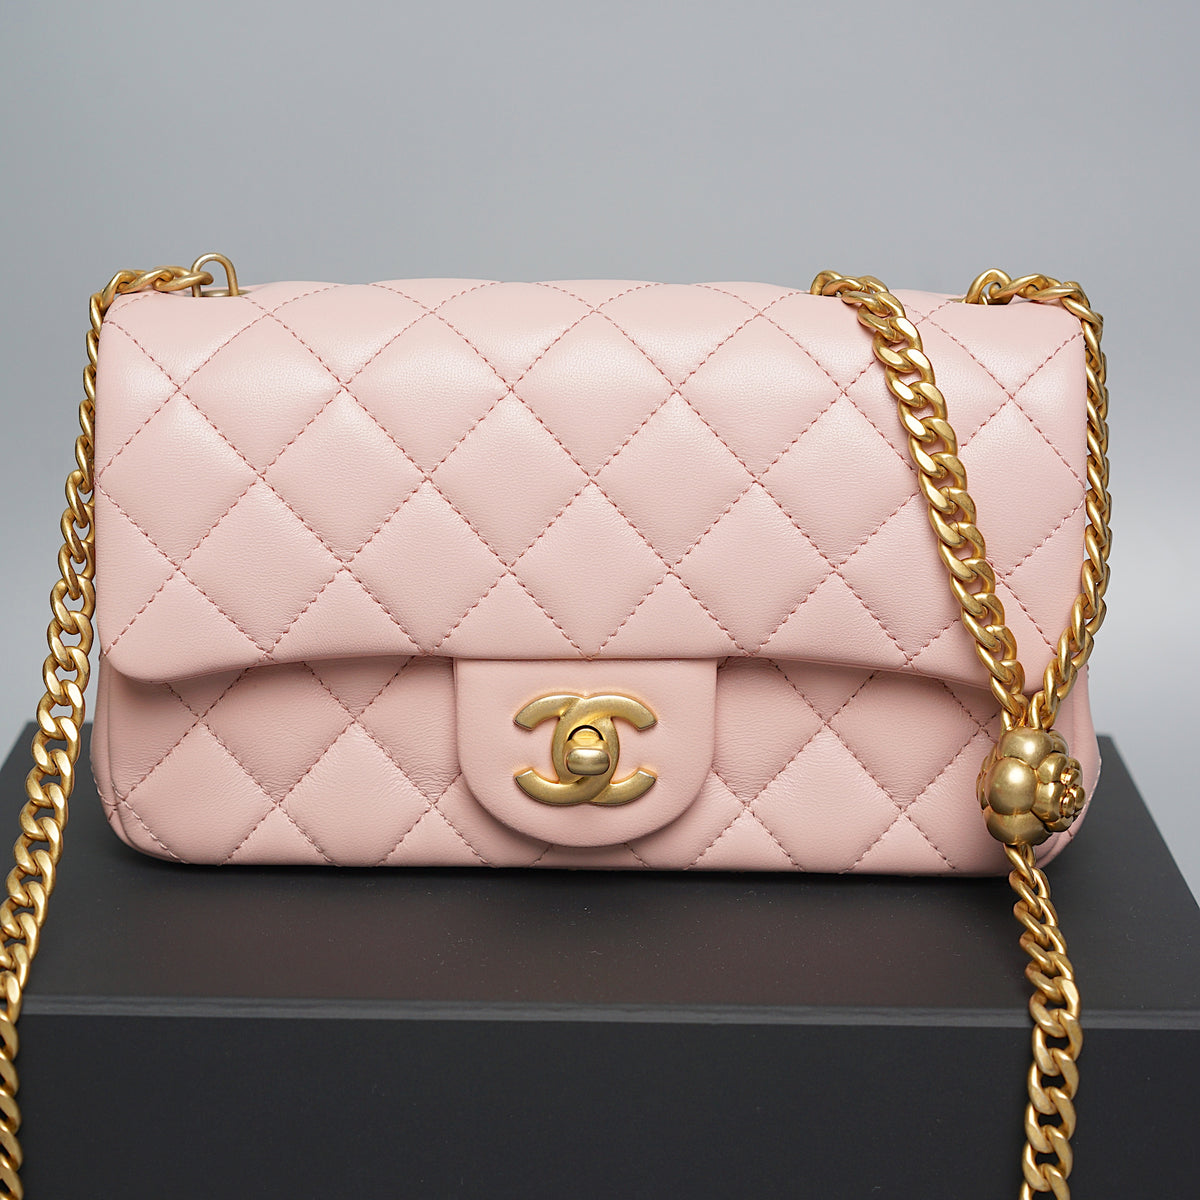 Chanel 23S Flap Bag with Camellia Crush (Brand New)